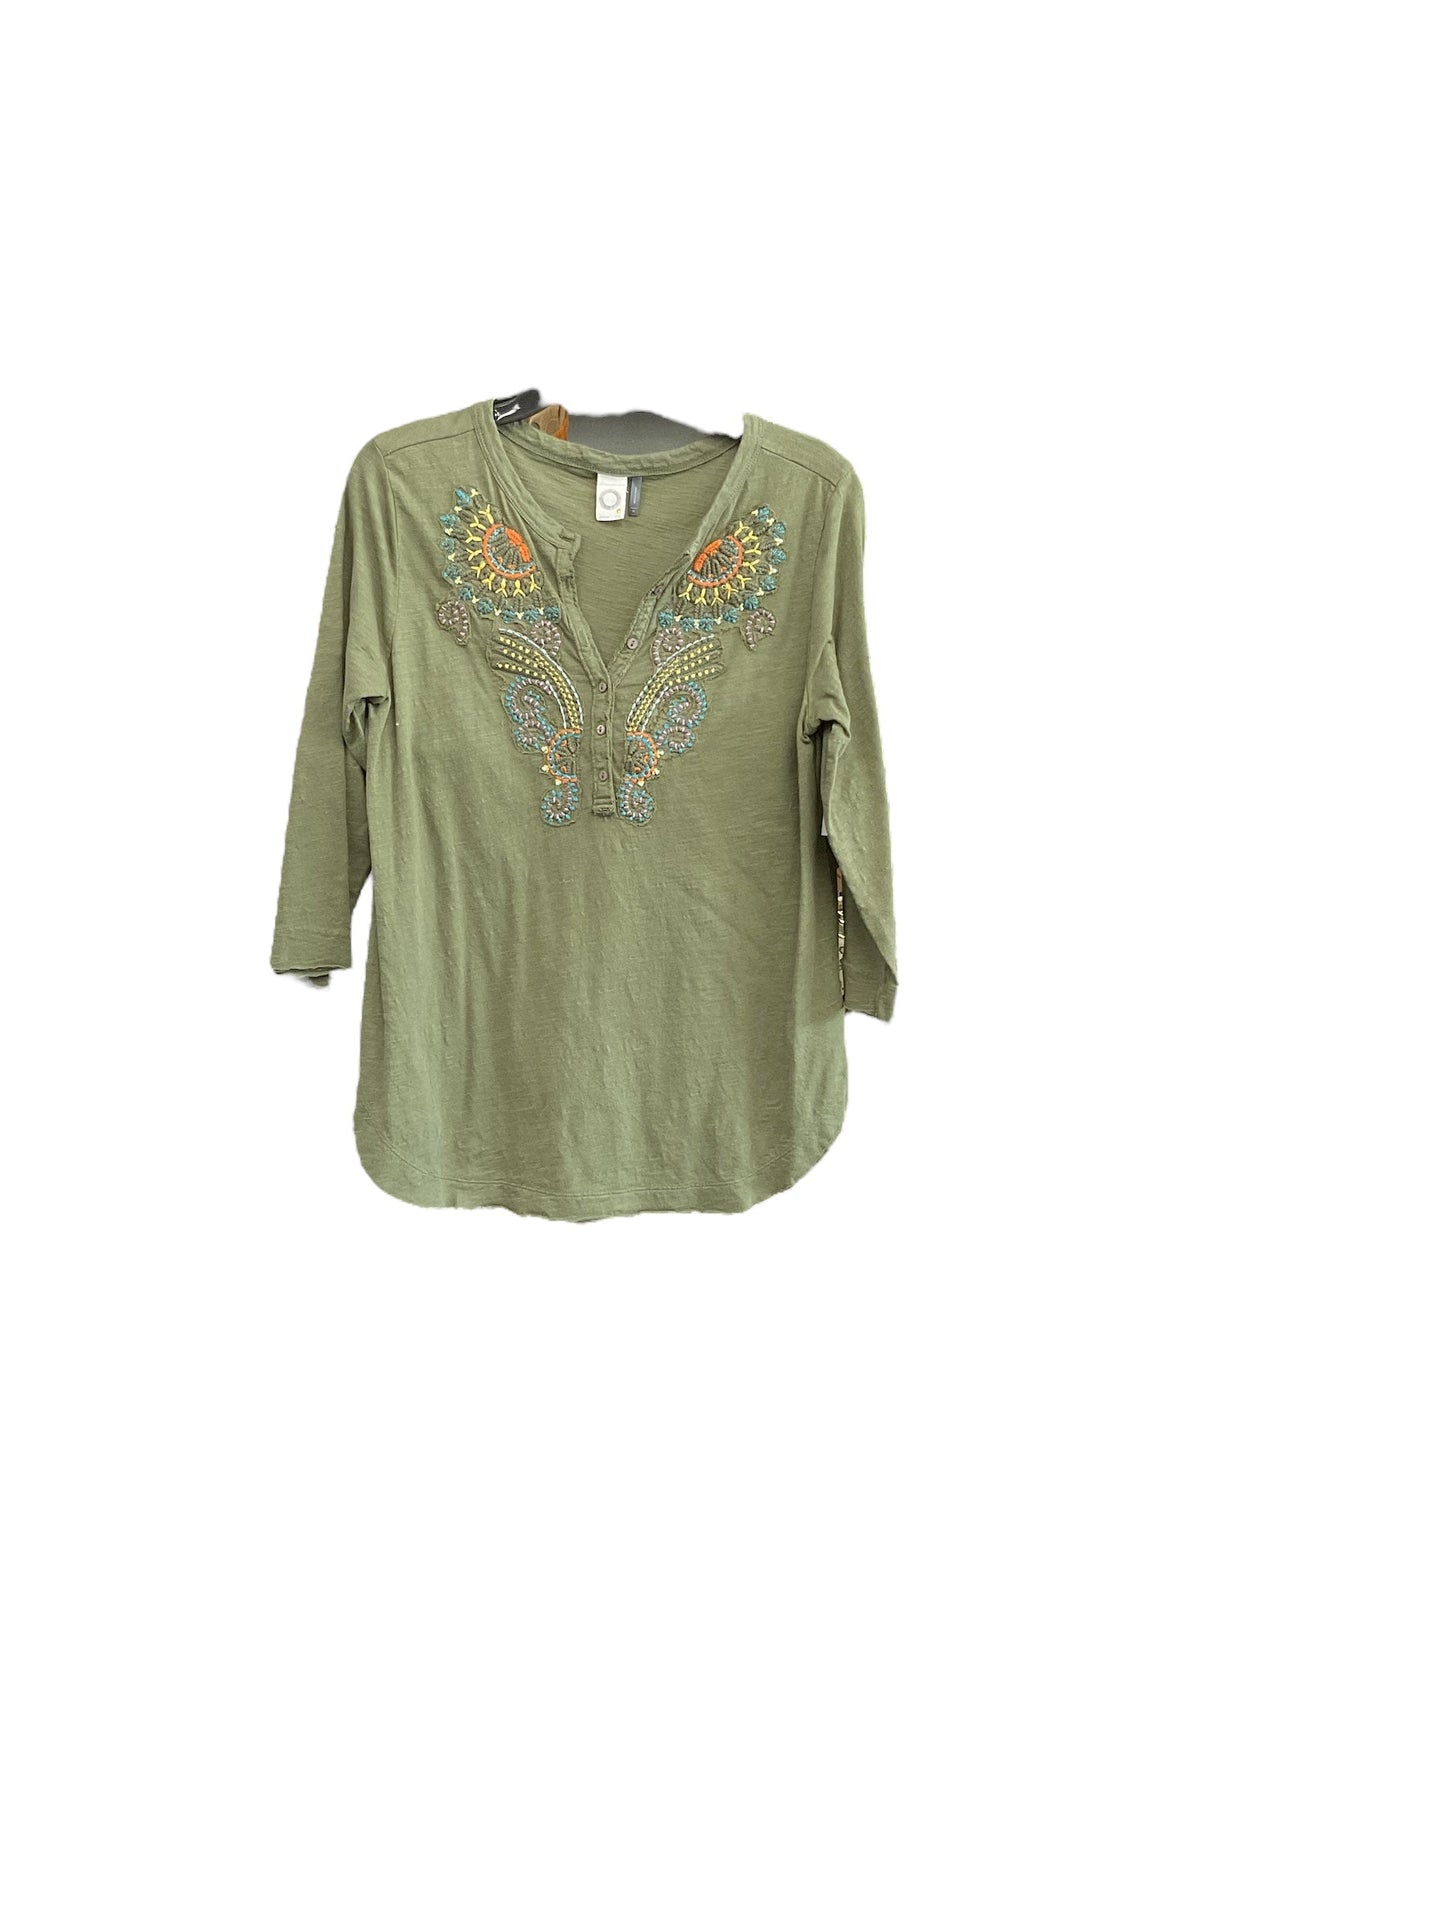 Green Top 3/4 Sleeve Anthropologie, Size M